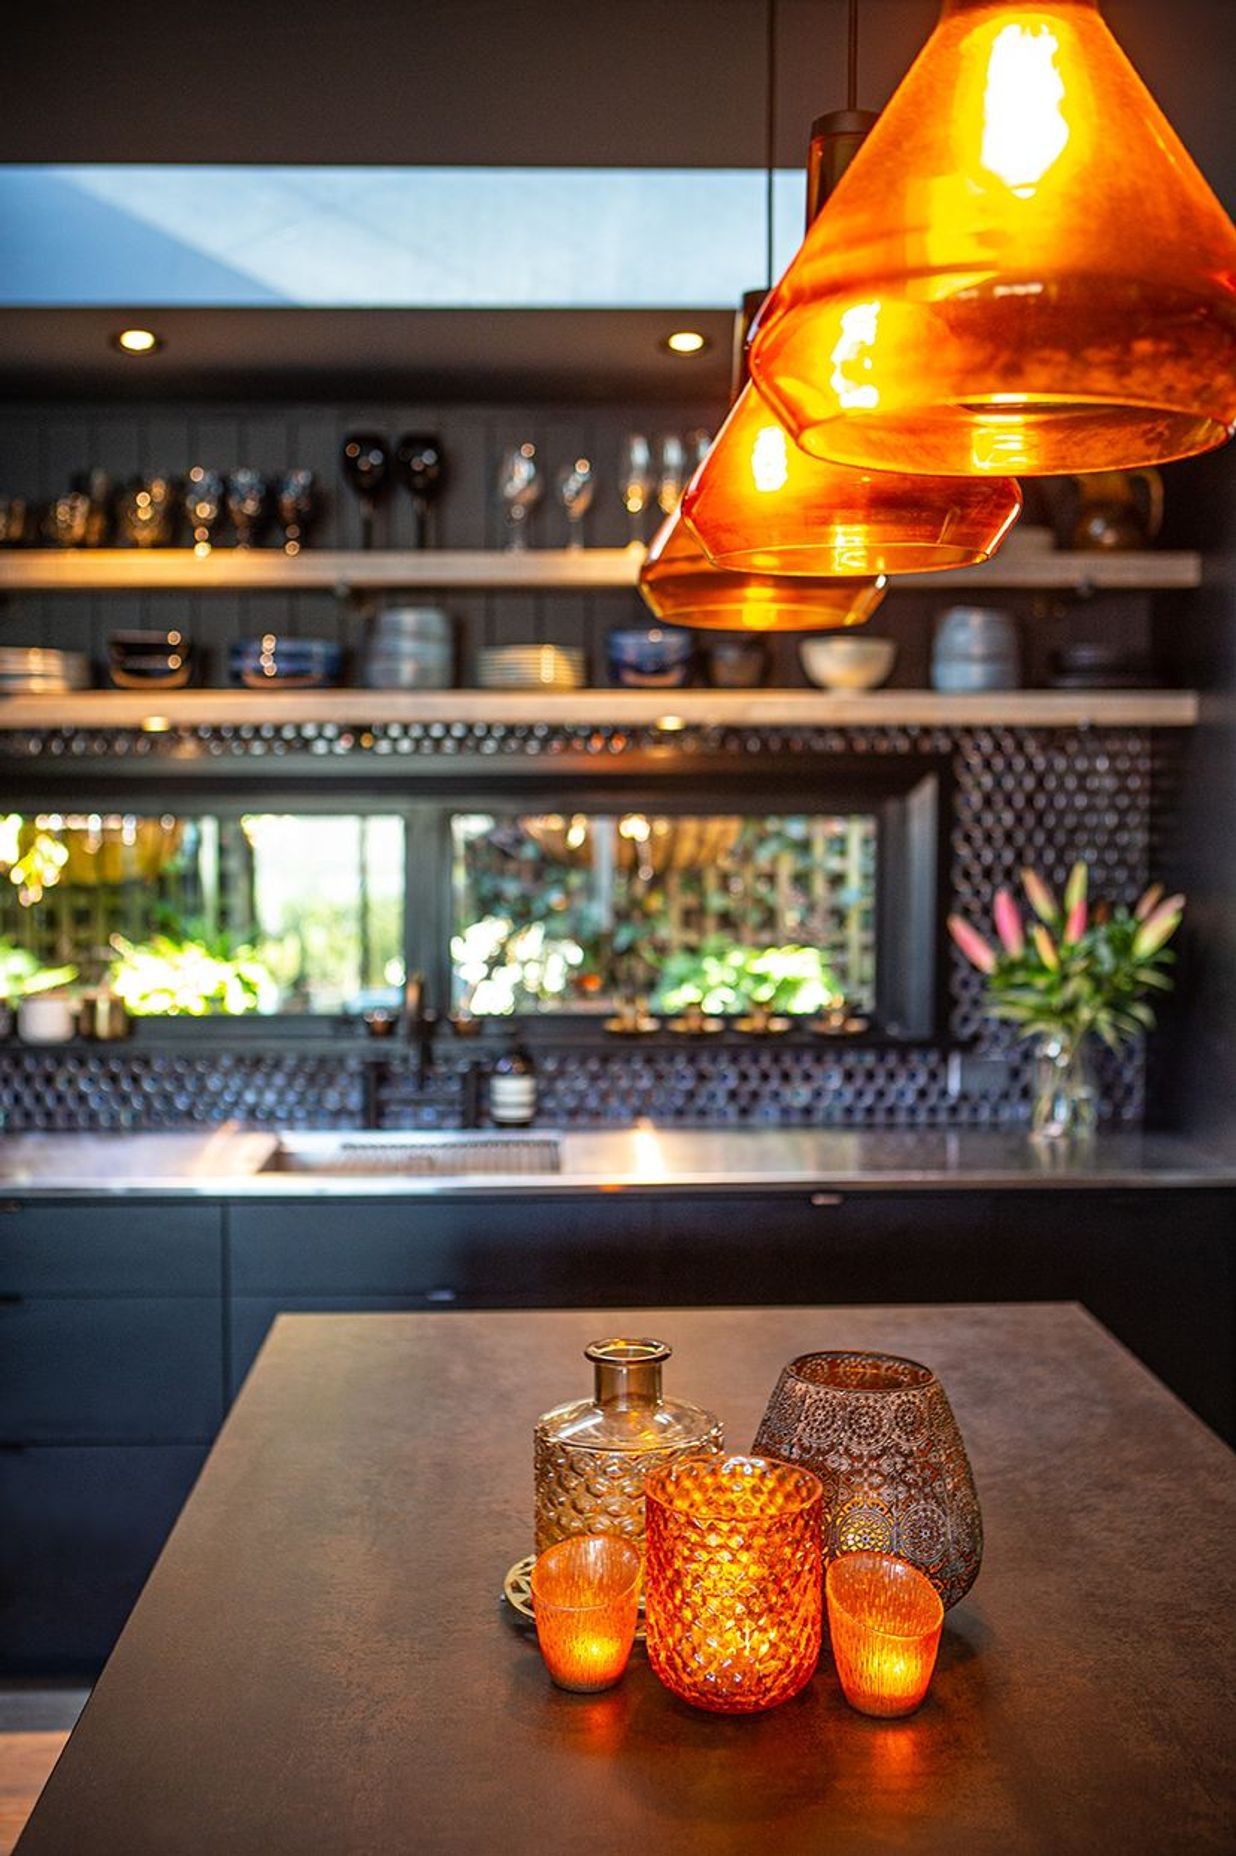 A copper stone benchtop and amber glass sets this kitchen alight.